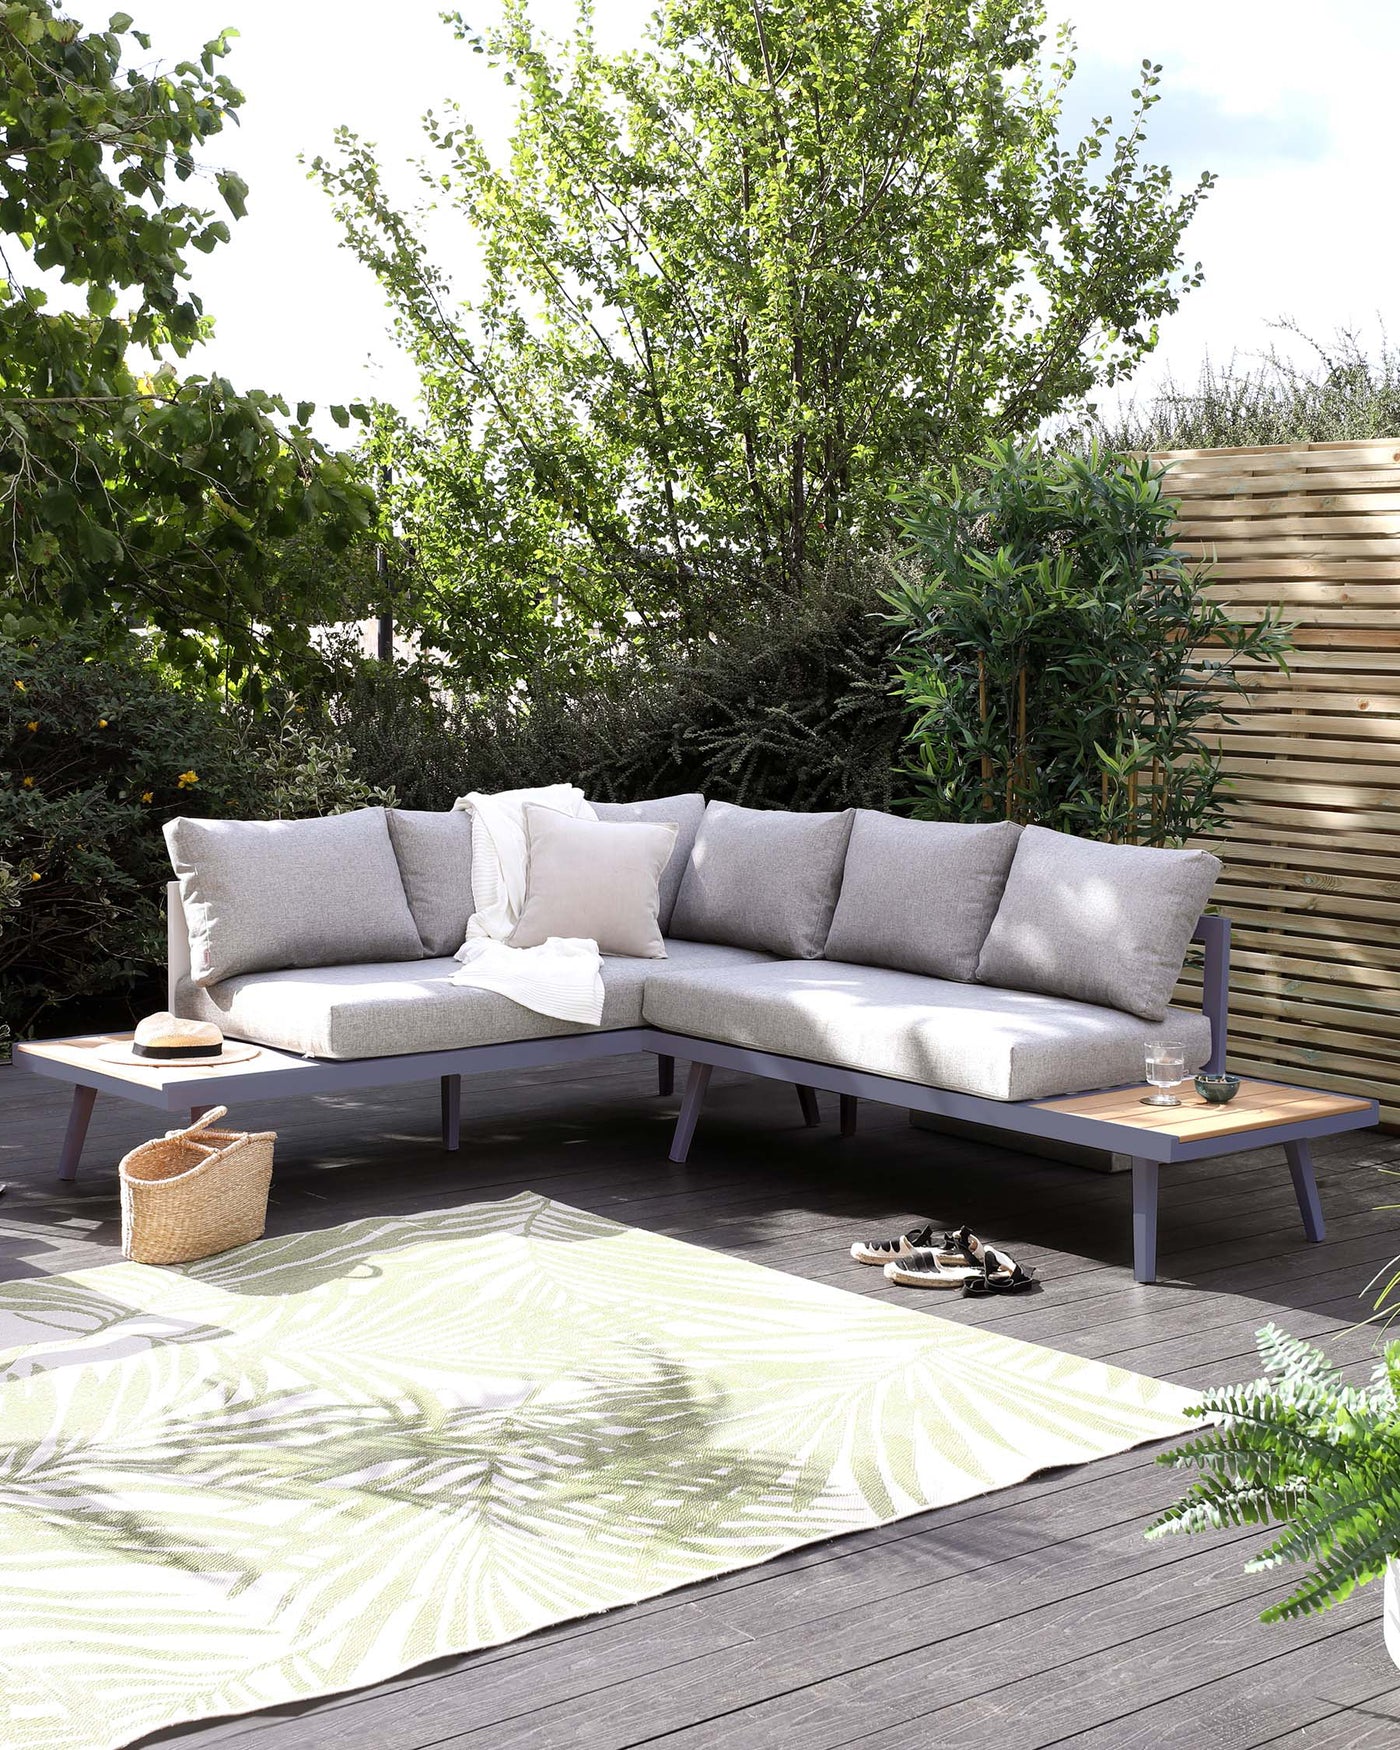 Outdoor sectional corner sofa with light grey cushions on a minimalist wooden frame, accompanied by a modern low coffee table with a dark grey top and light wooden legs, set upon an ornate green and white patterned area rug. A woven wicker basket adds a touch of natural texture to the setting.